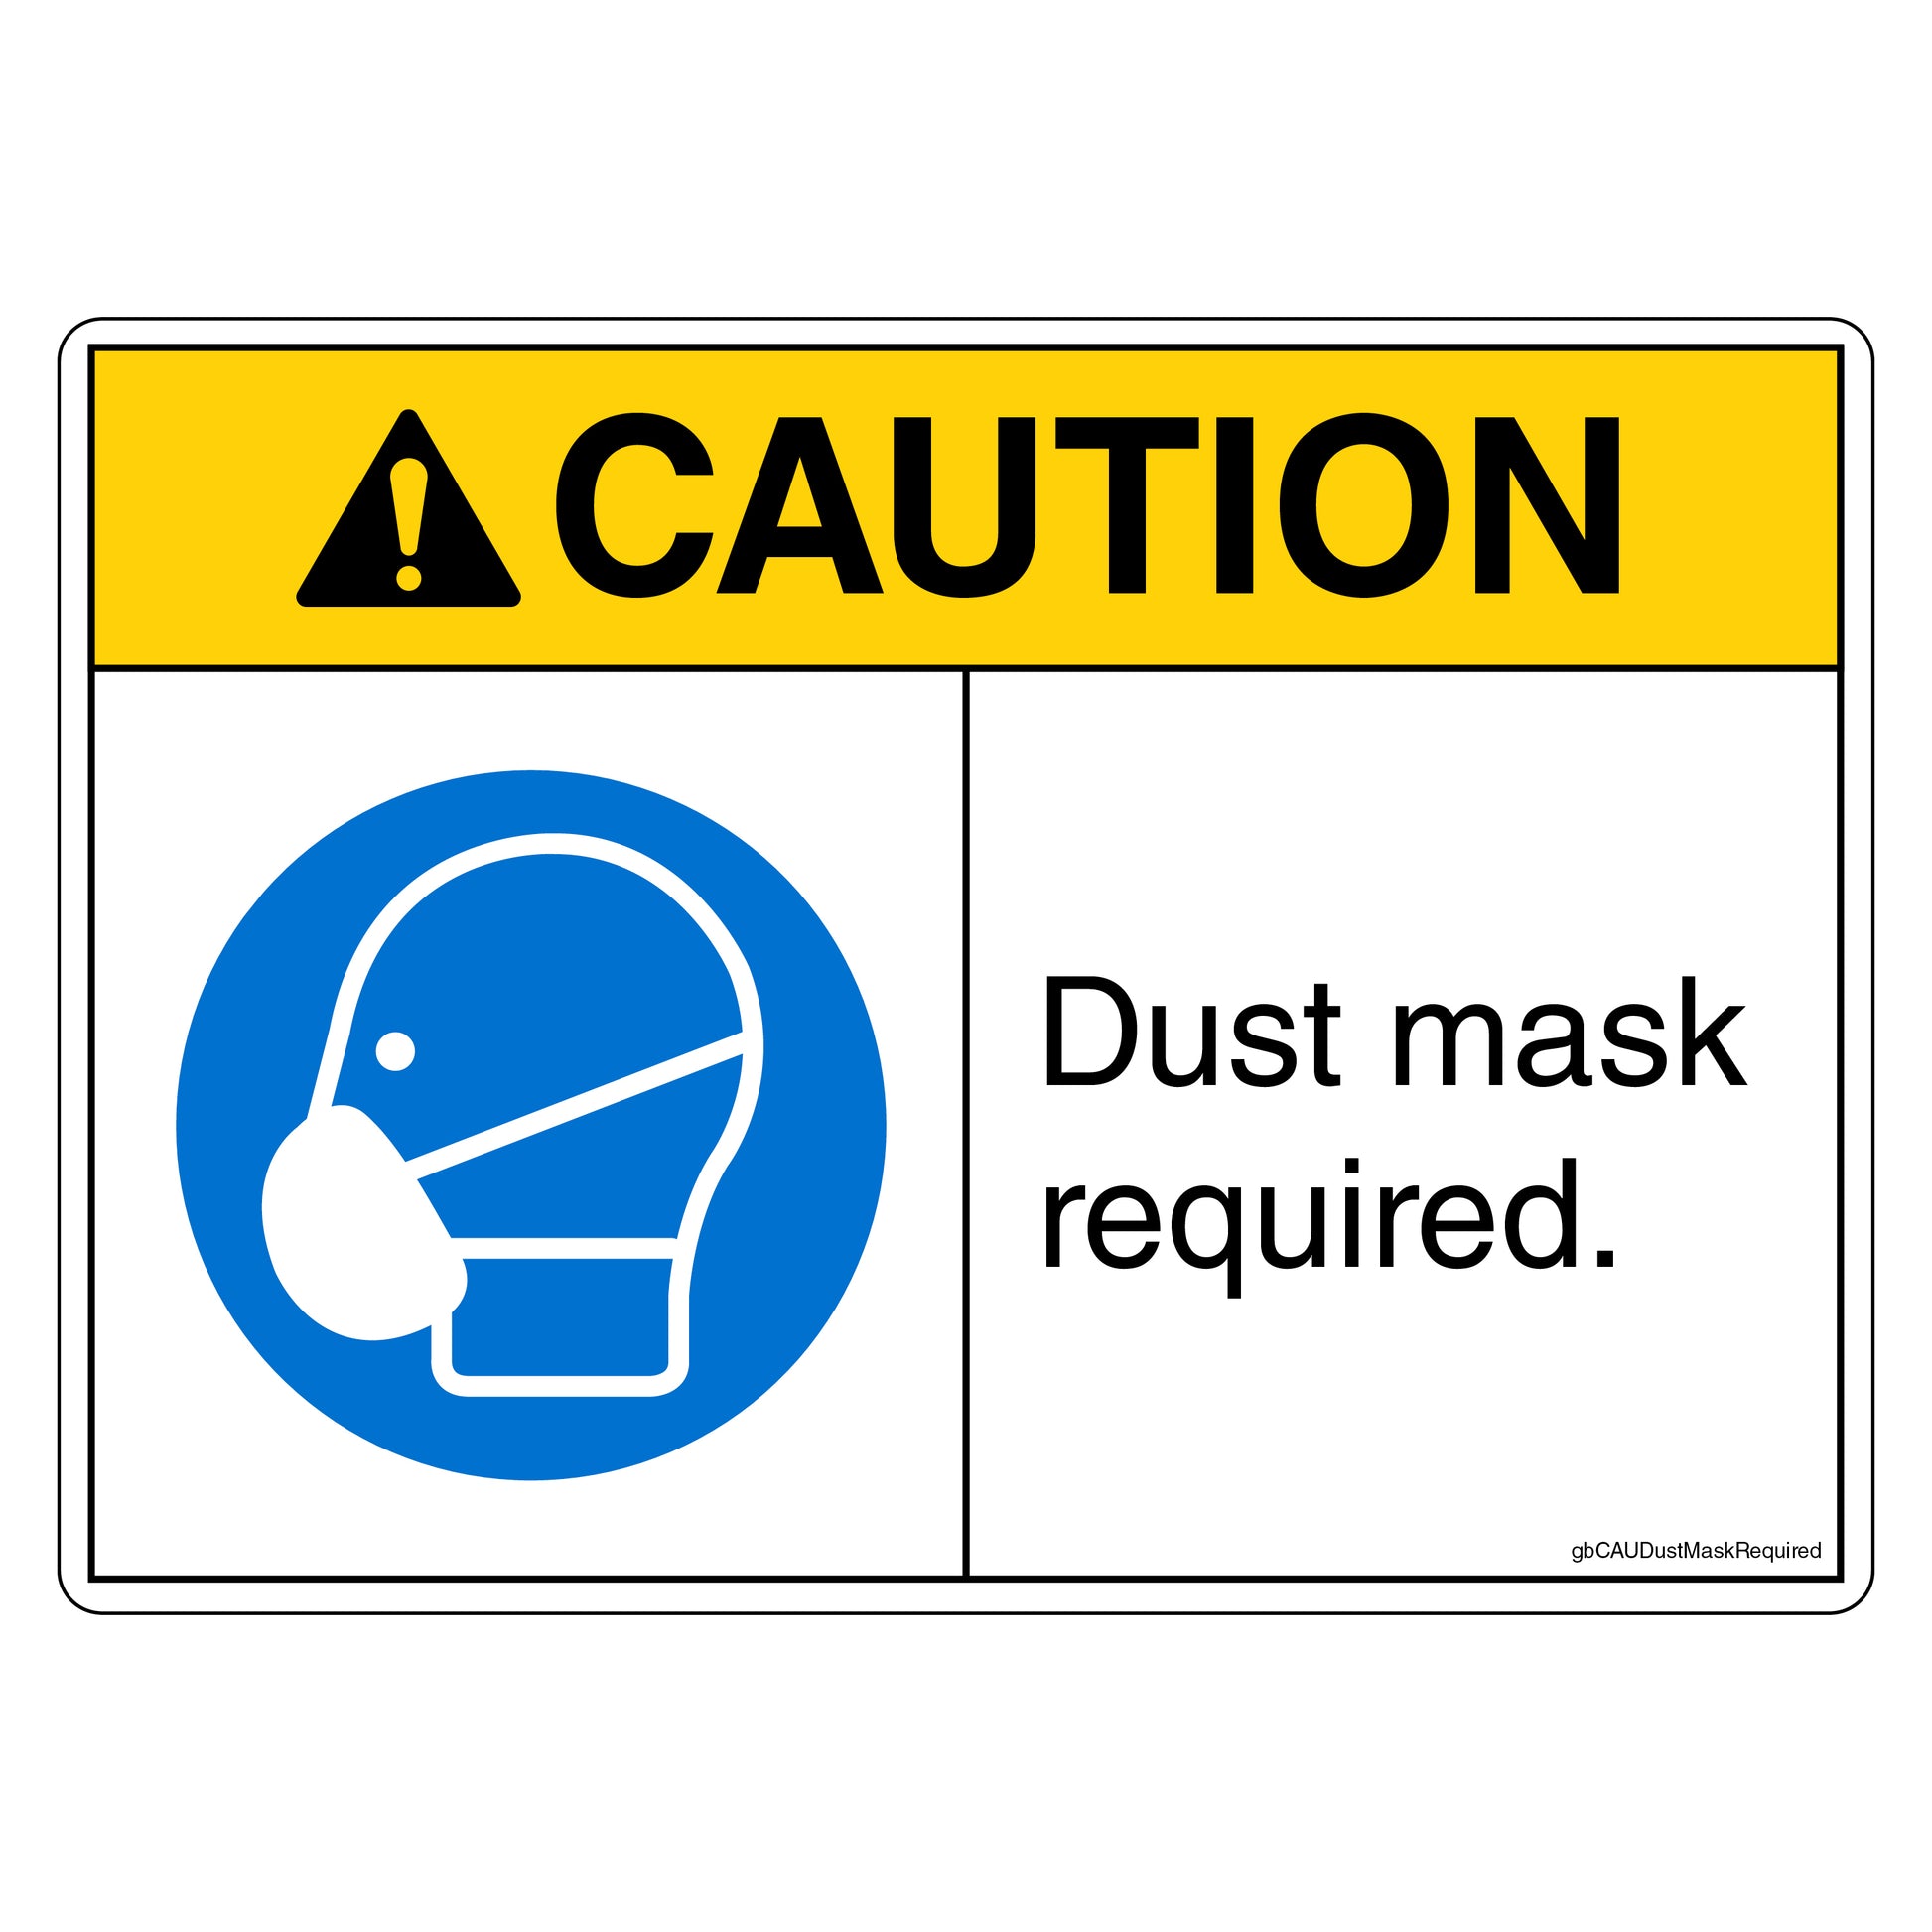 Caution Dust Mask Required Decal.